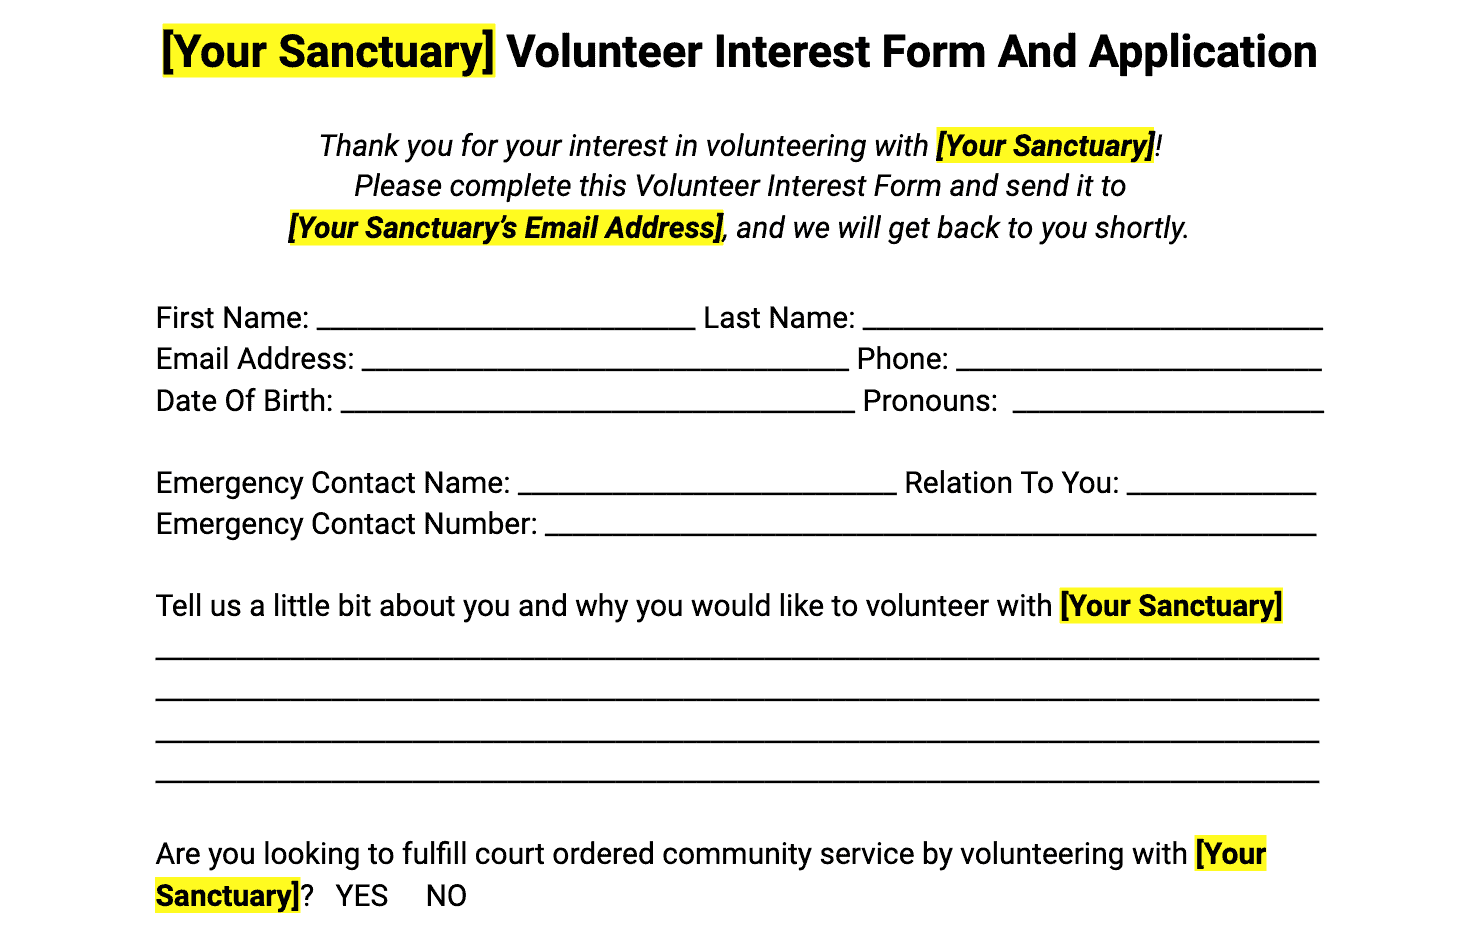 The Open Sanctuary Project's Volunteer Interest Form And Application